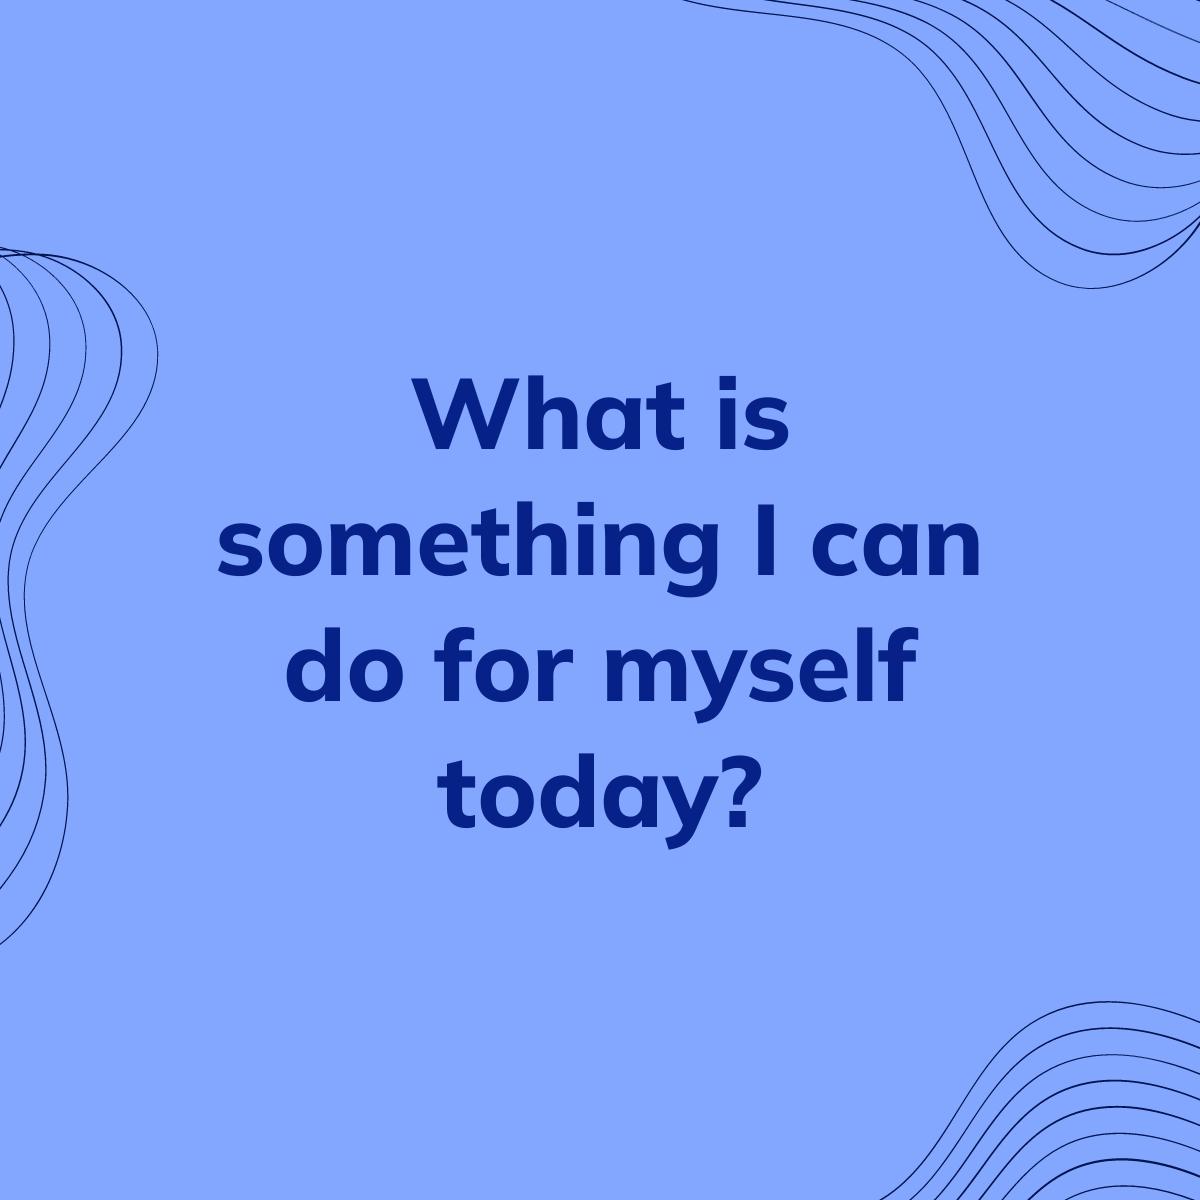 Journal Prompt: What is something I can do for myself today?